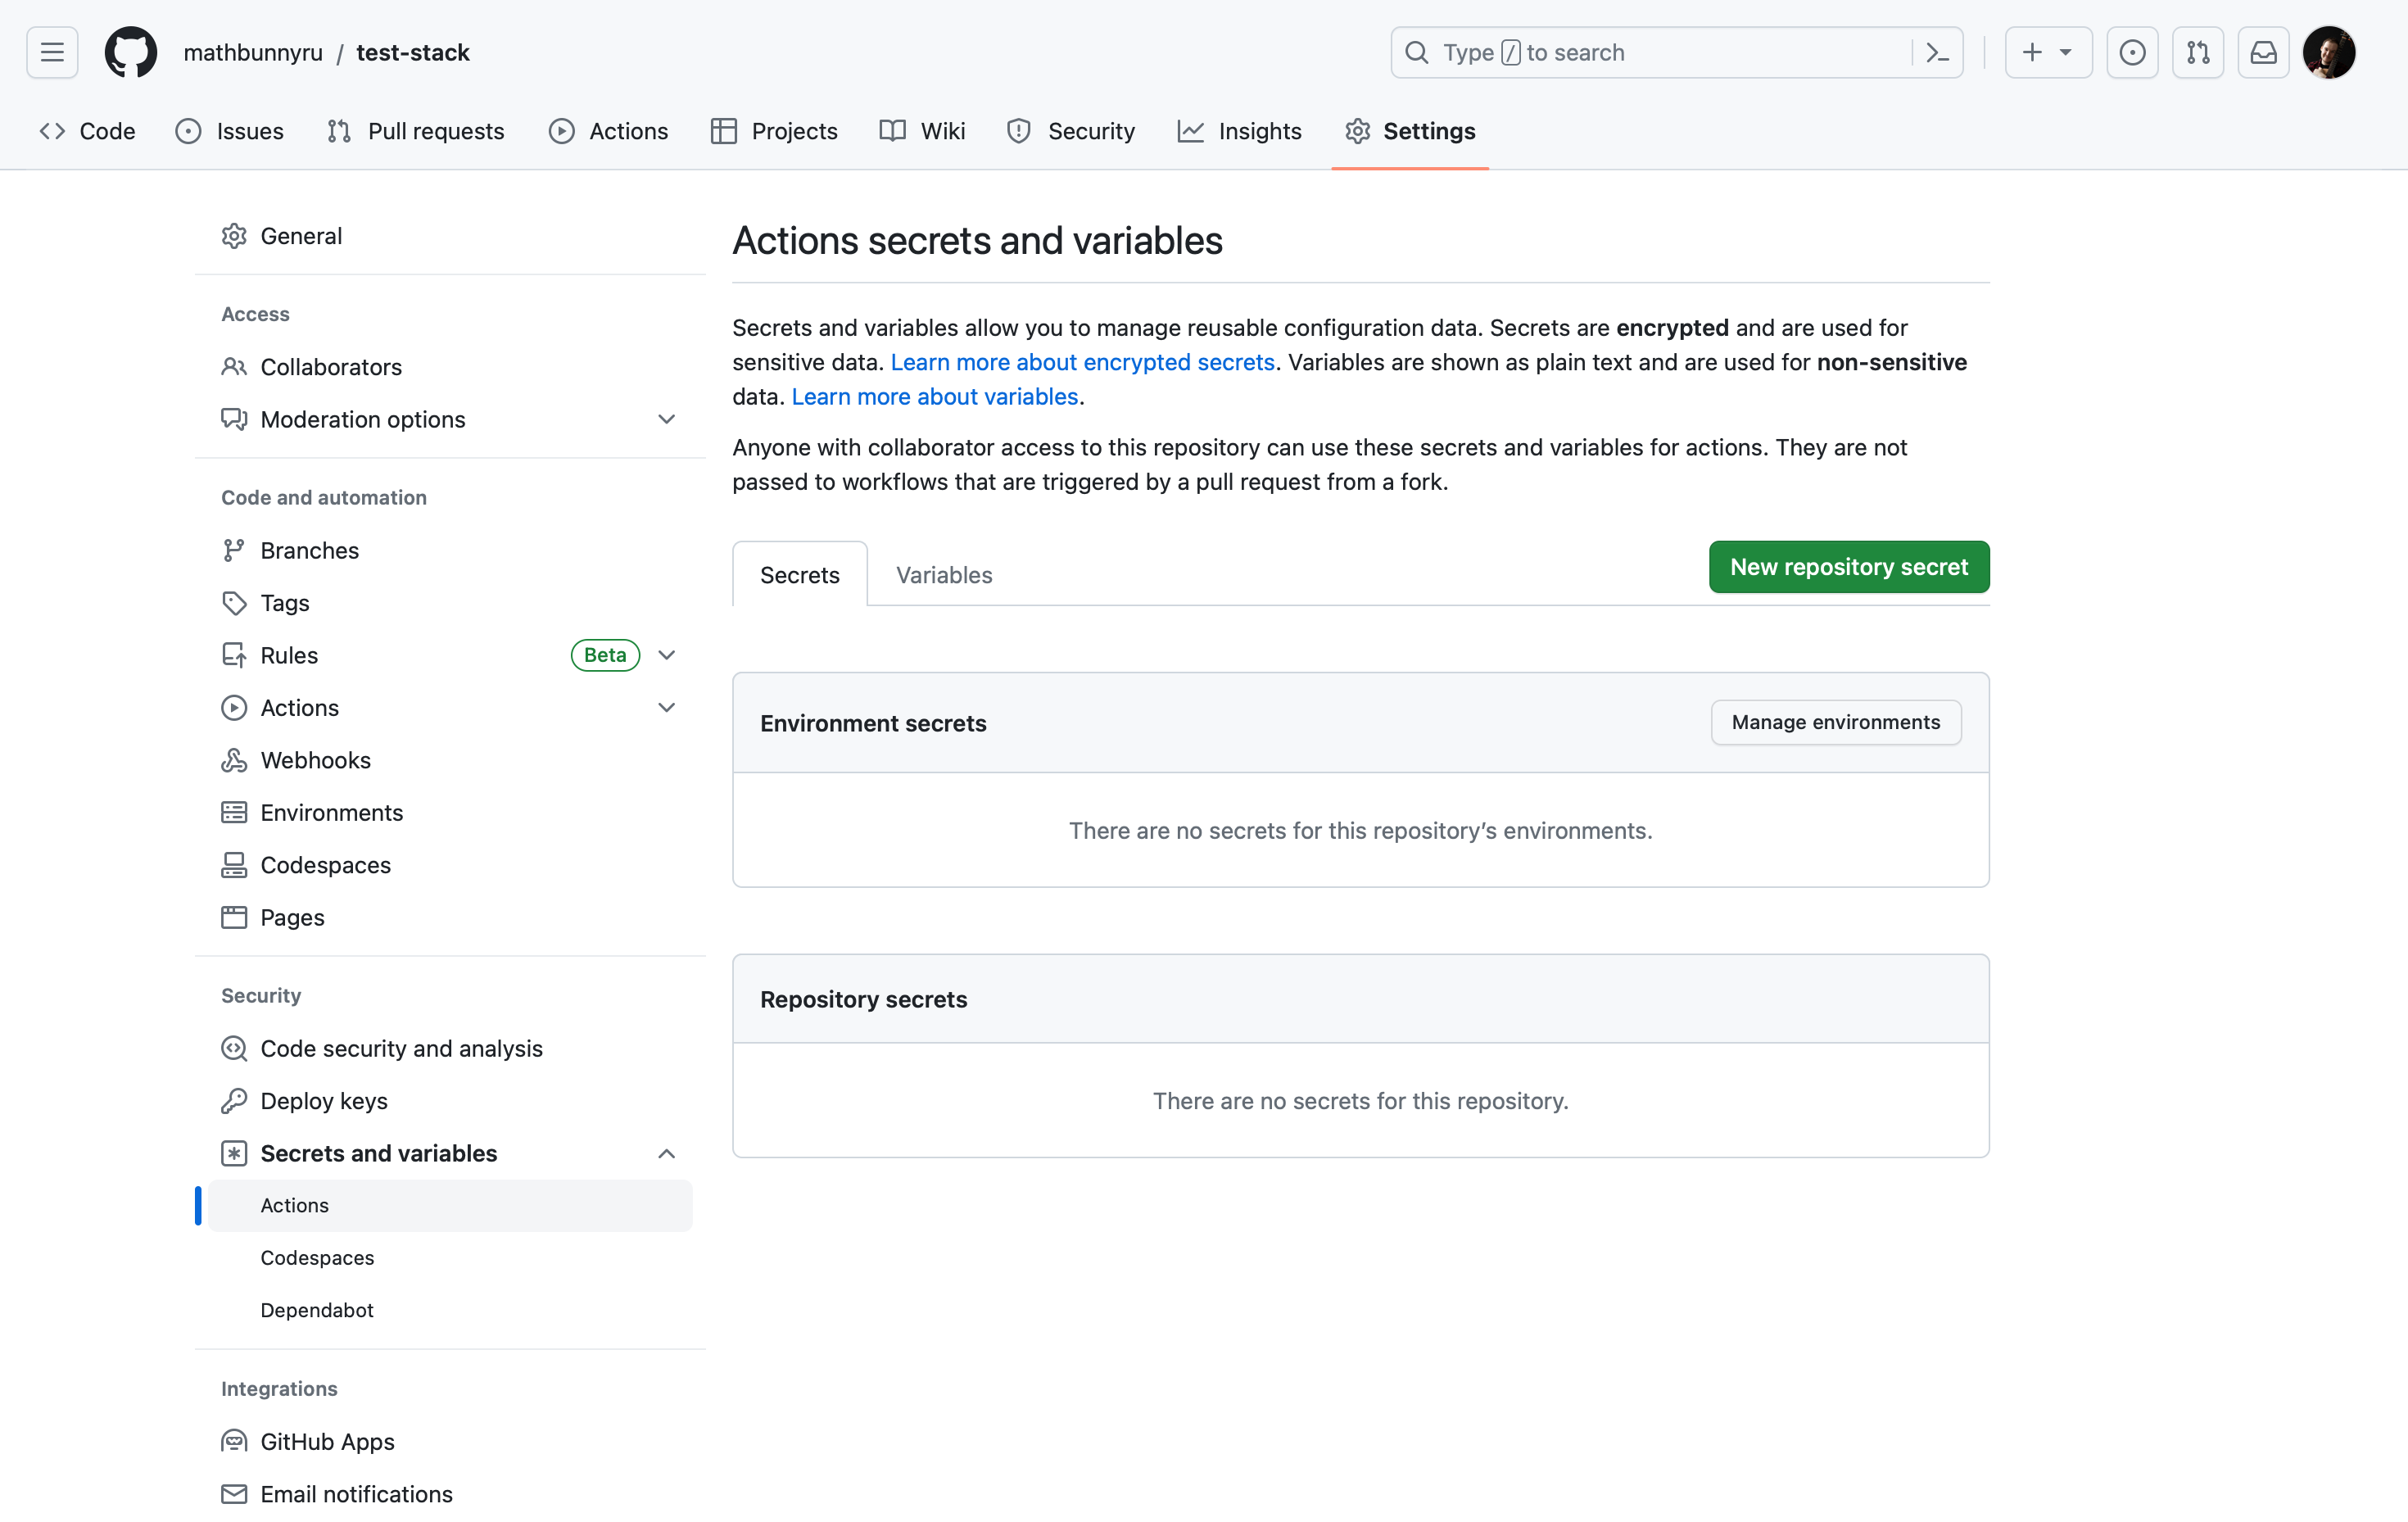 GitHub page with the the "Setting" tab active and a rectangle highlighting the "New repository secret" button in the UI